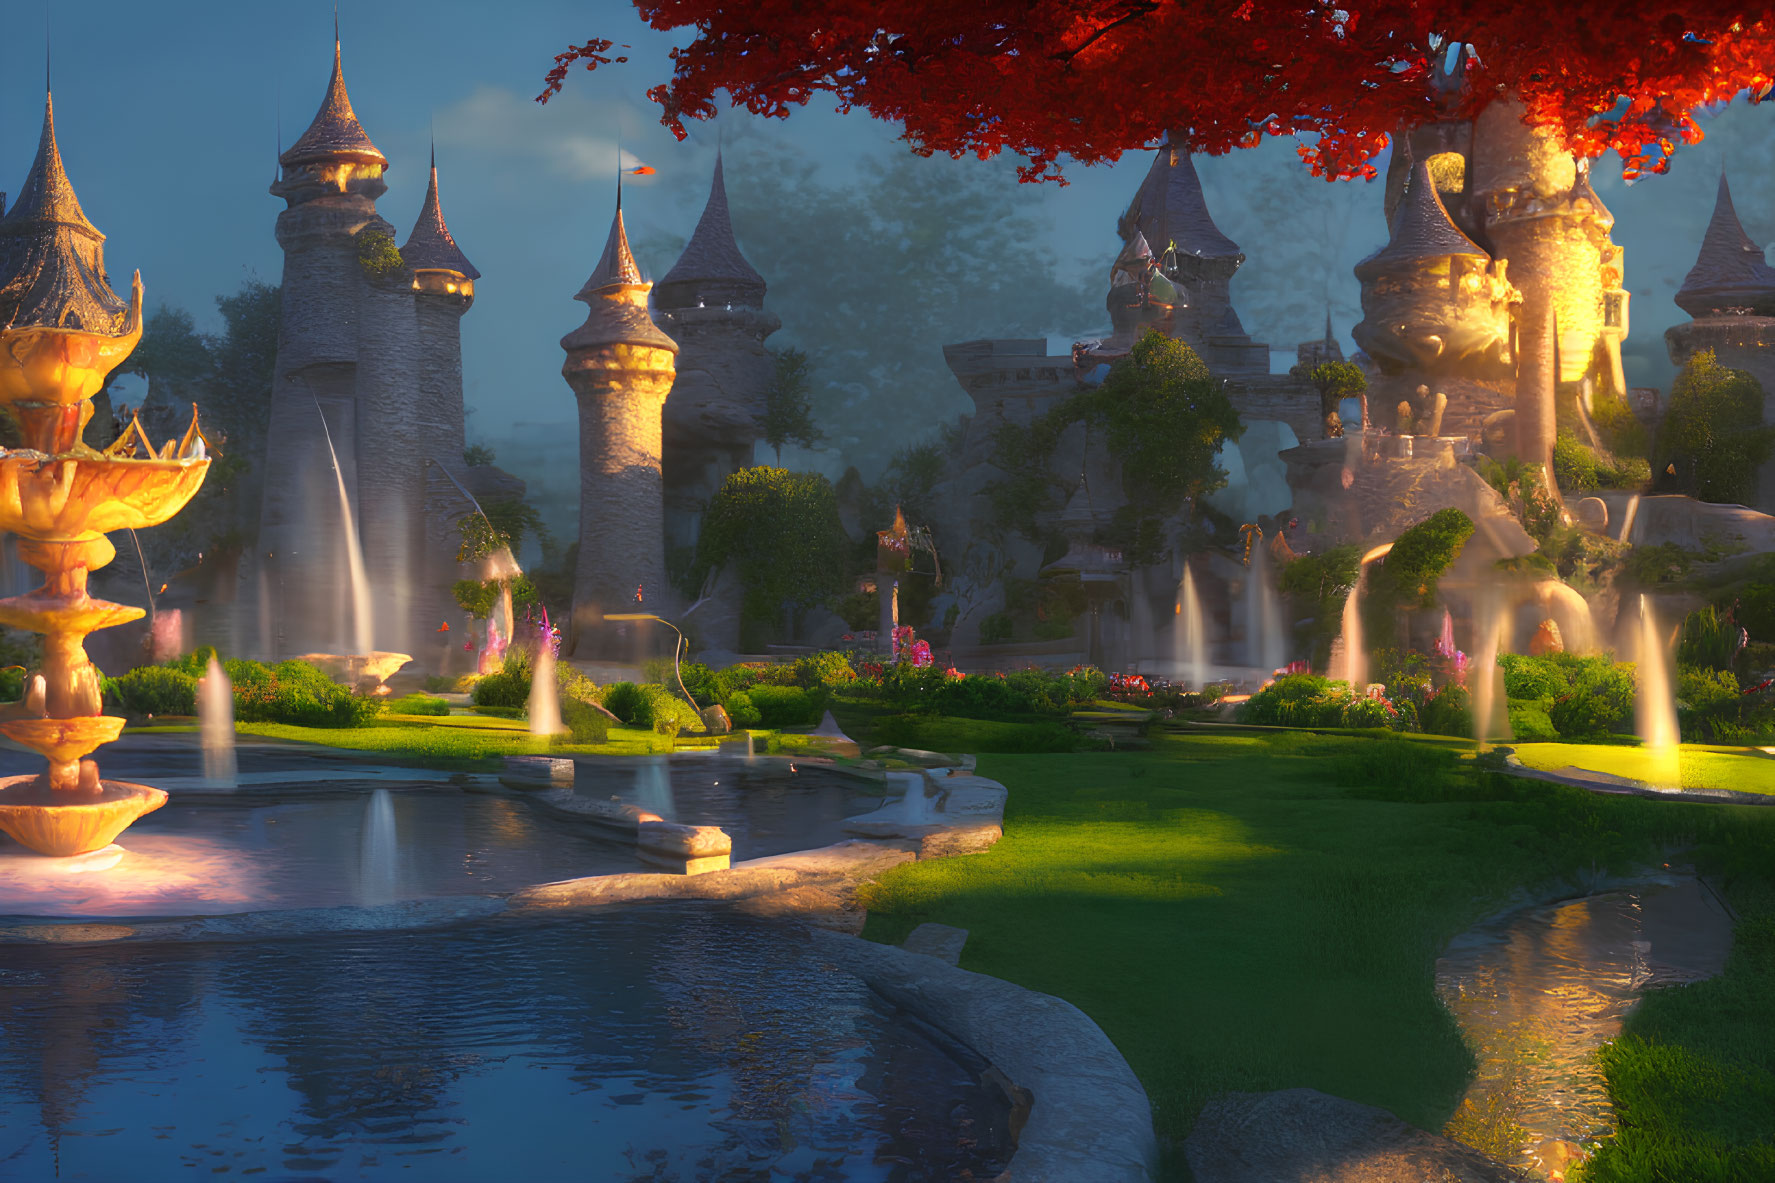 Fantasy castle at sunset with glowing lights, water fountains, lush gardens, tranquil waters, and